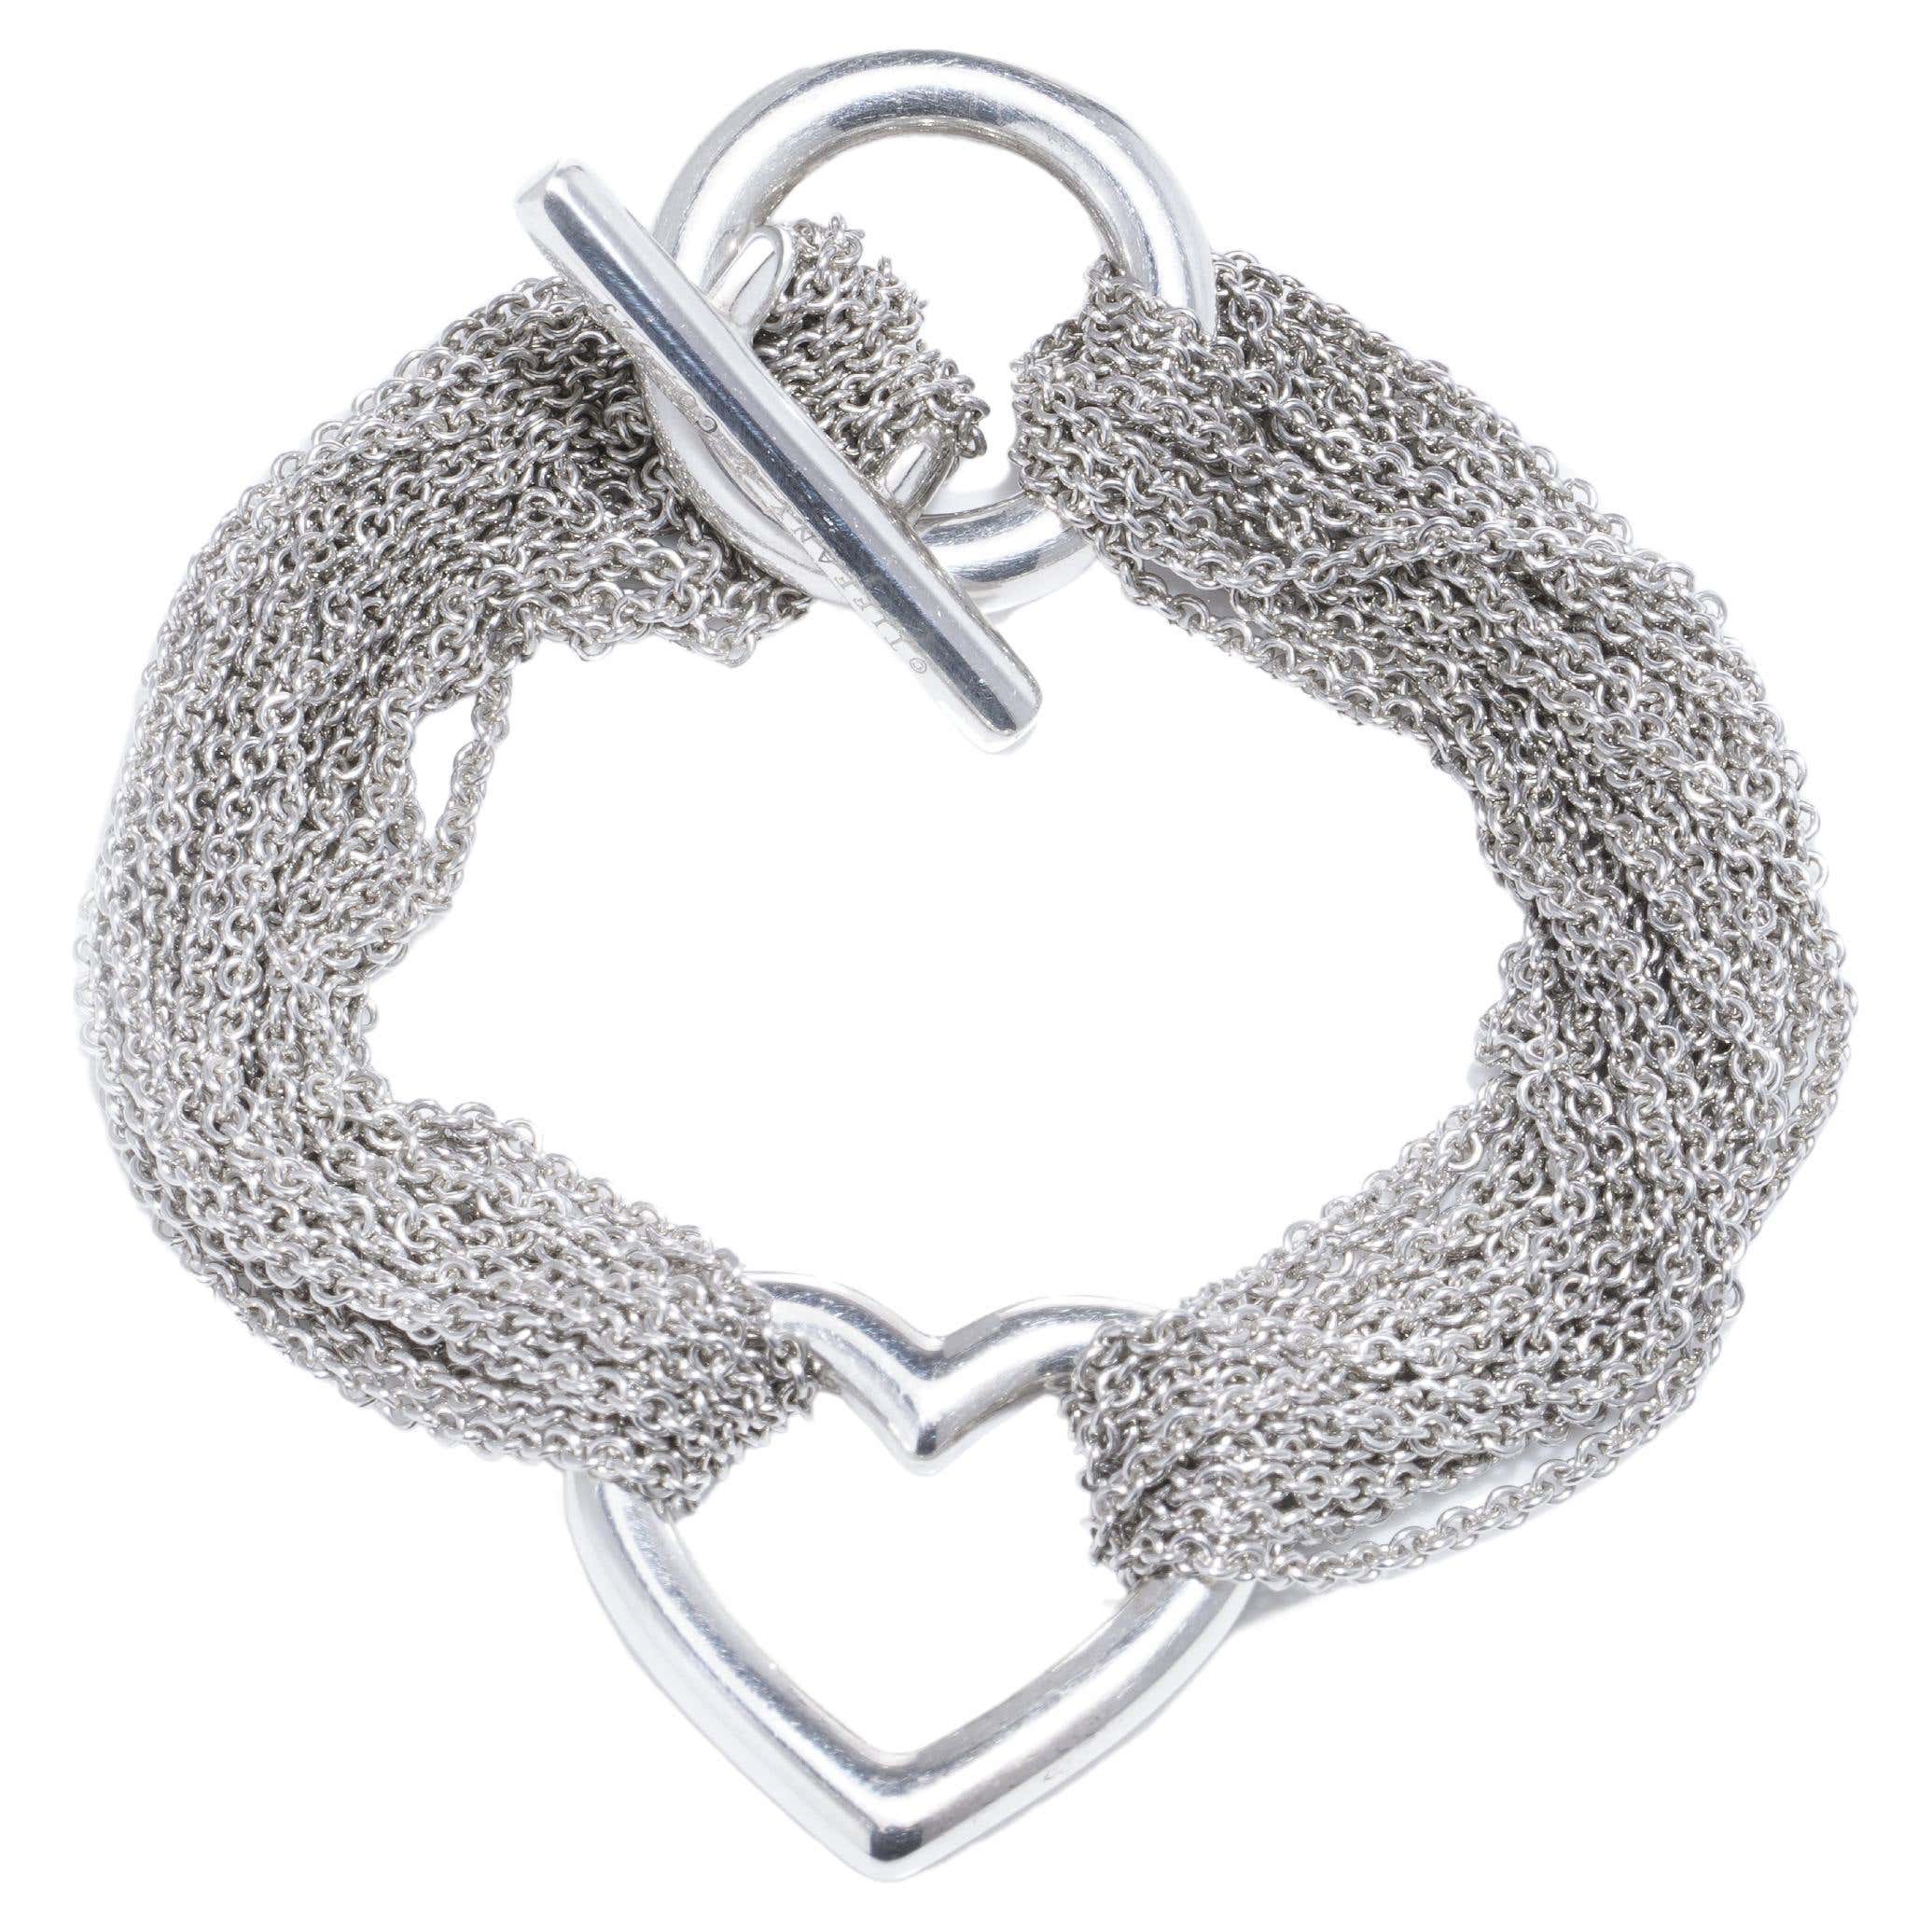 Tiffany & Co. sterling 925 silver chain bracelet with a heart-shaped pendant 